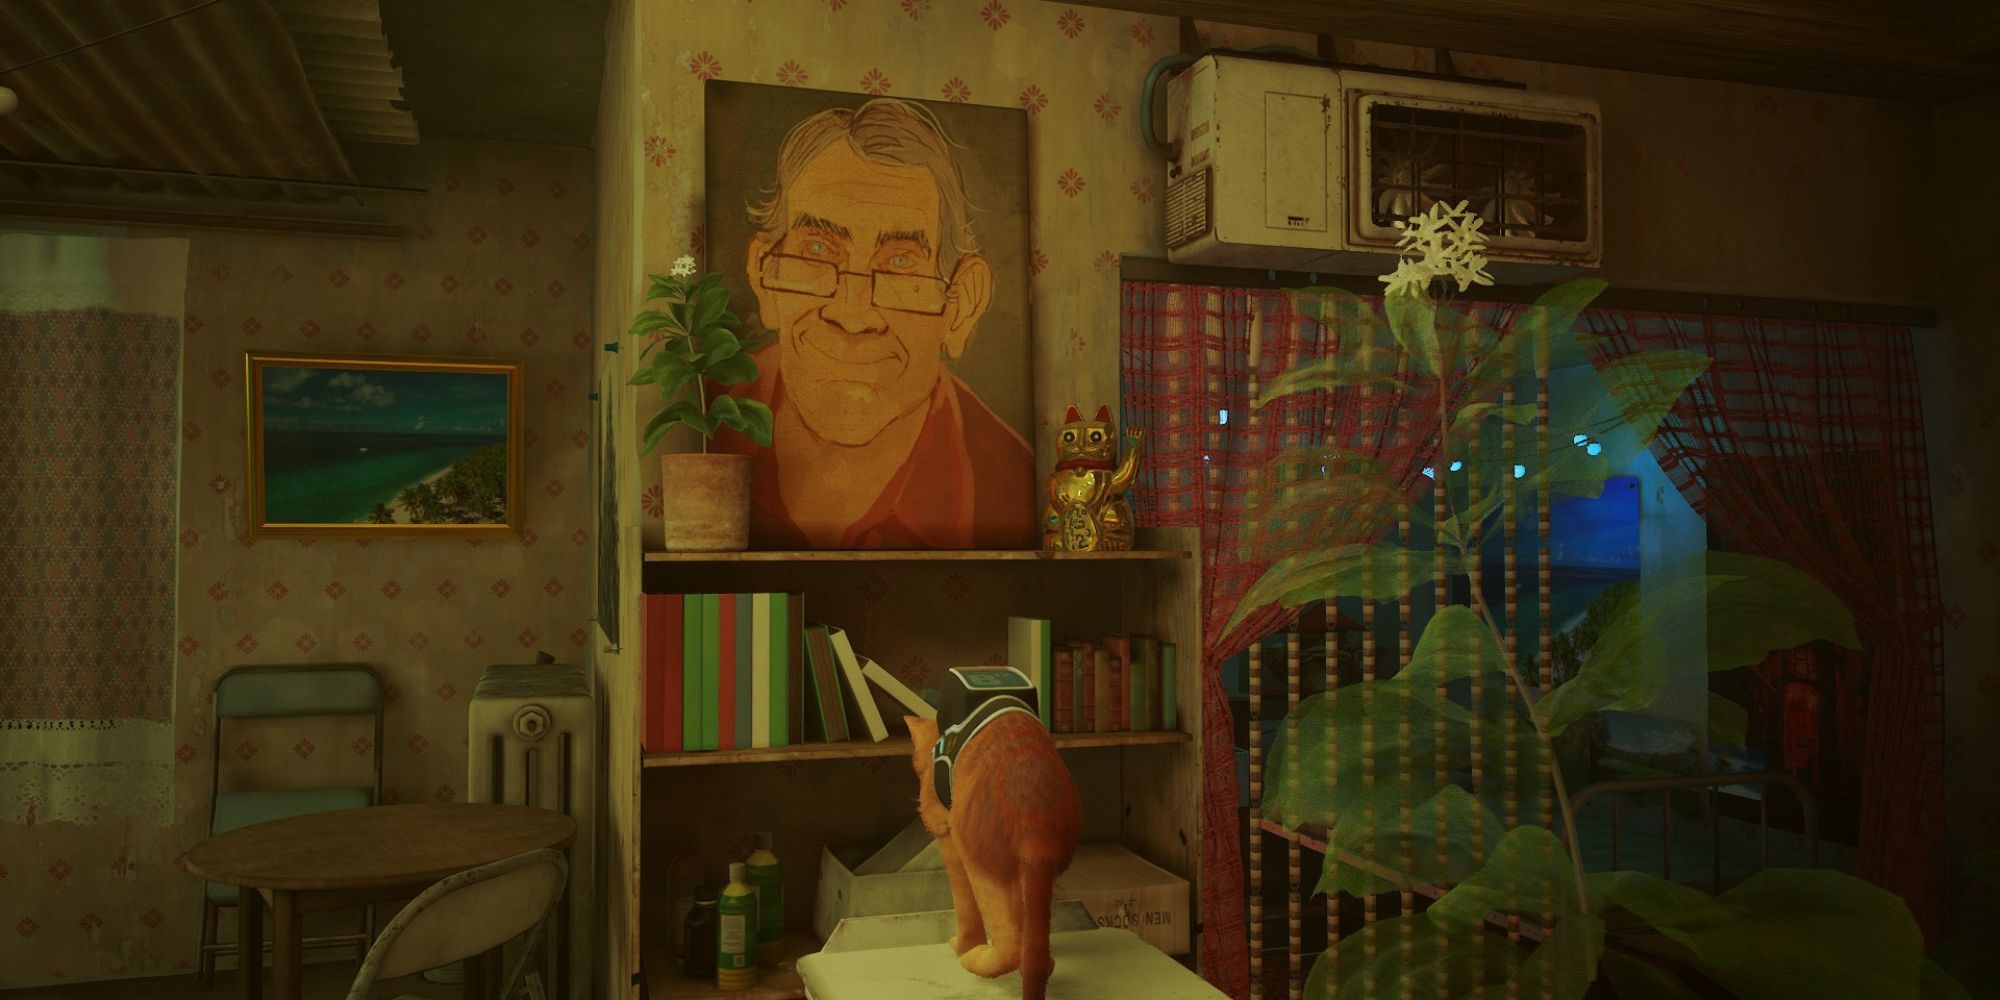 on the wall above a bookshelf, a painted portrait of what looks like Team Fortress' Medic in his older years hangs